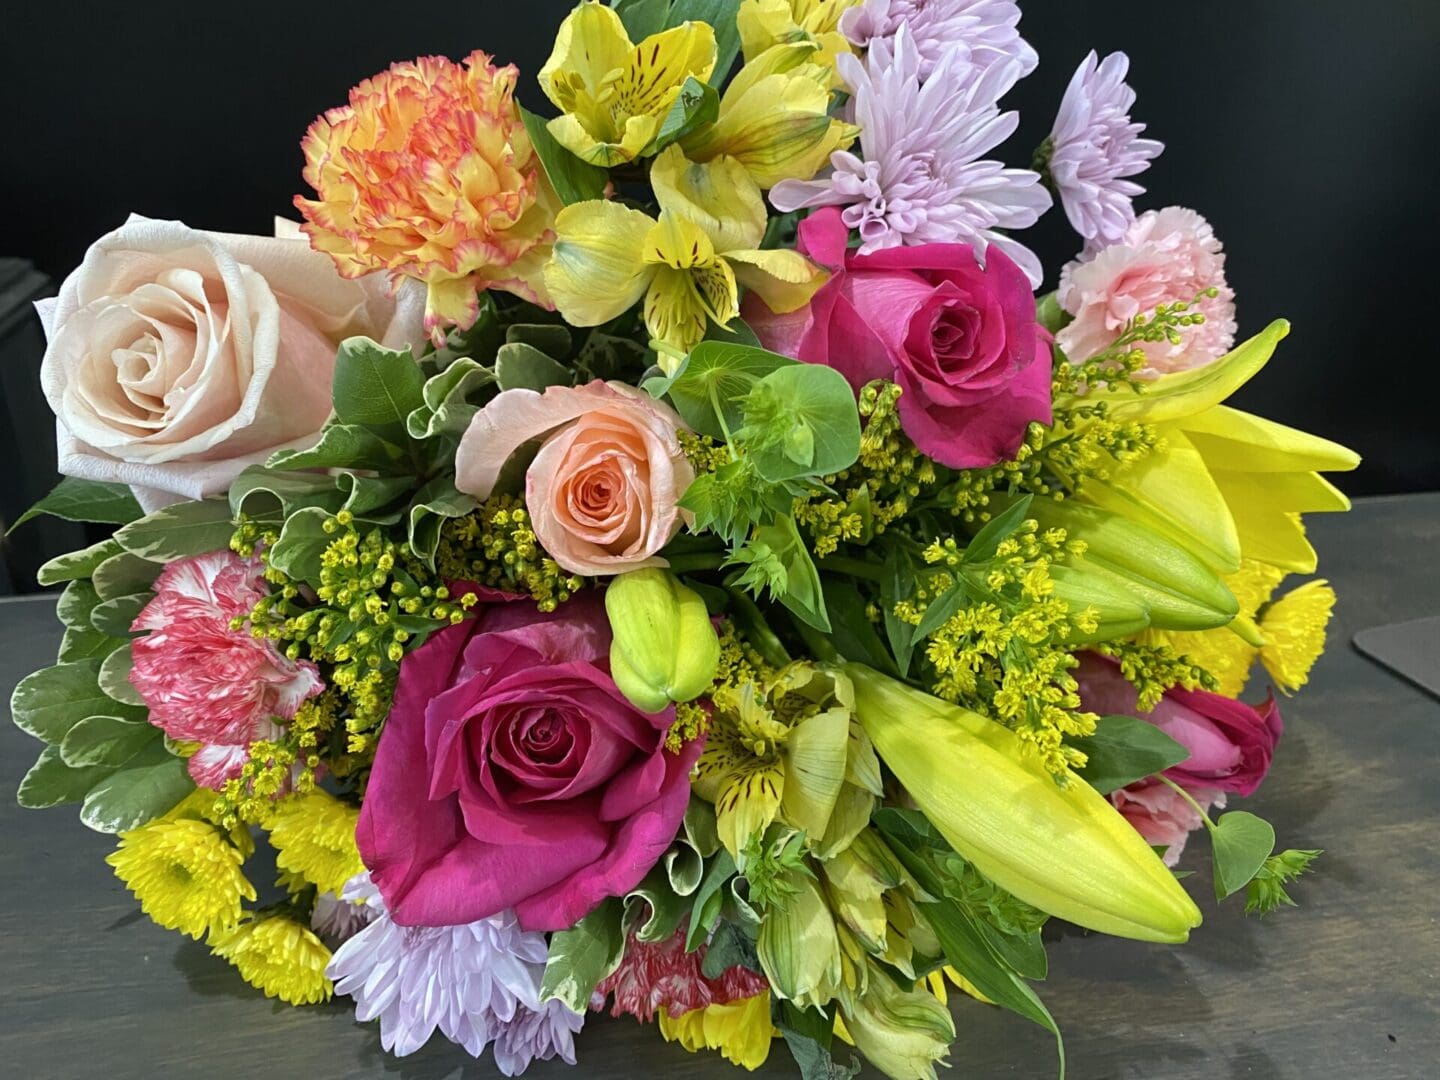 A bouquet of yellow, pink, and purple flowers